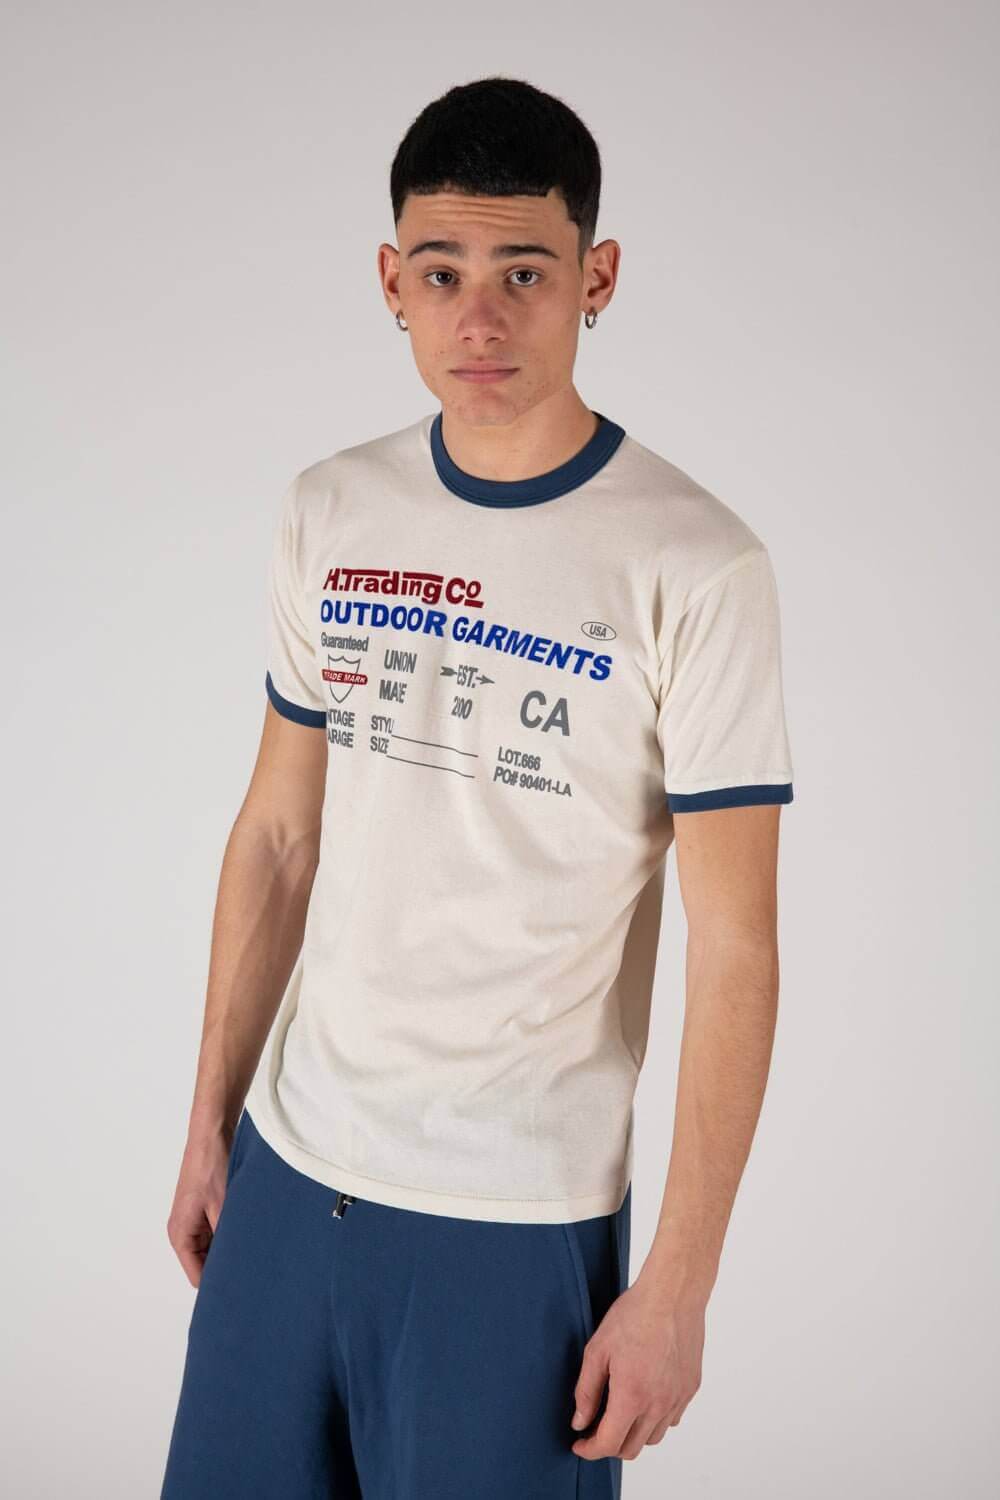 ARMLESS - OUTDOOR Regular fit t-shirt printed on the front. Composition: 100% Cotton HTC LOS ANGELES